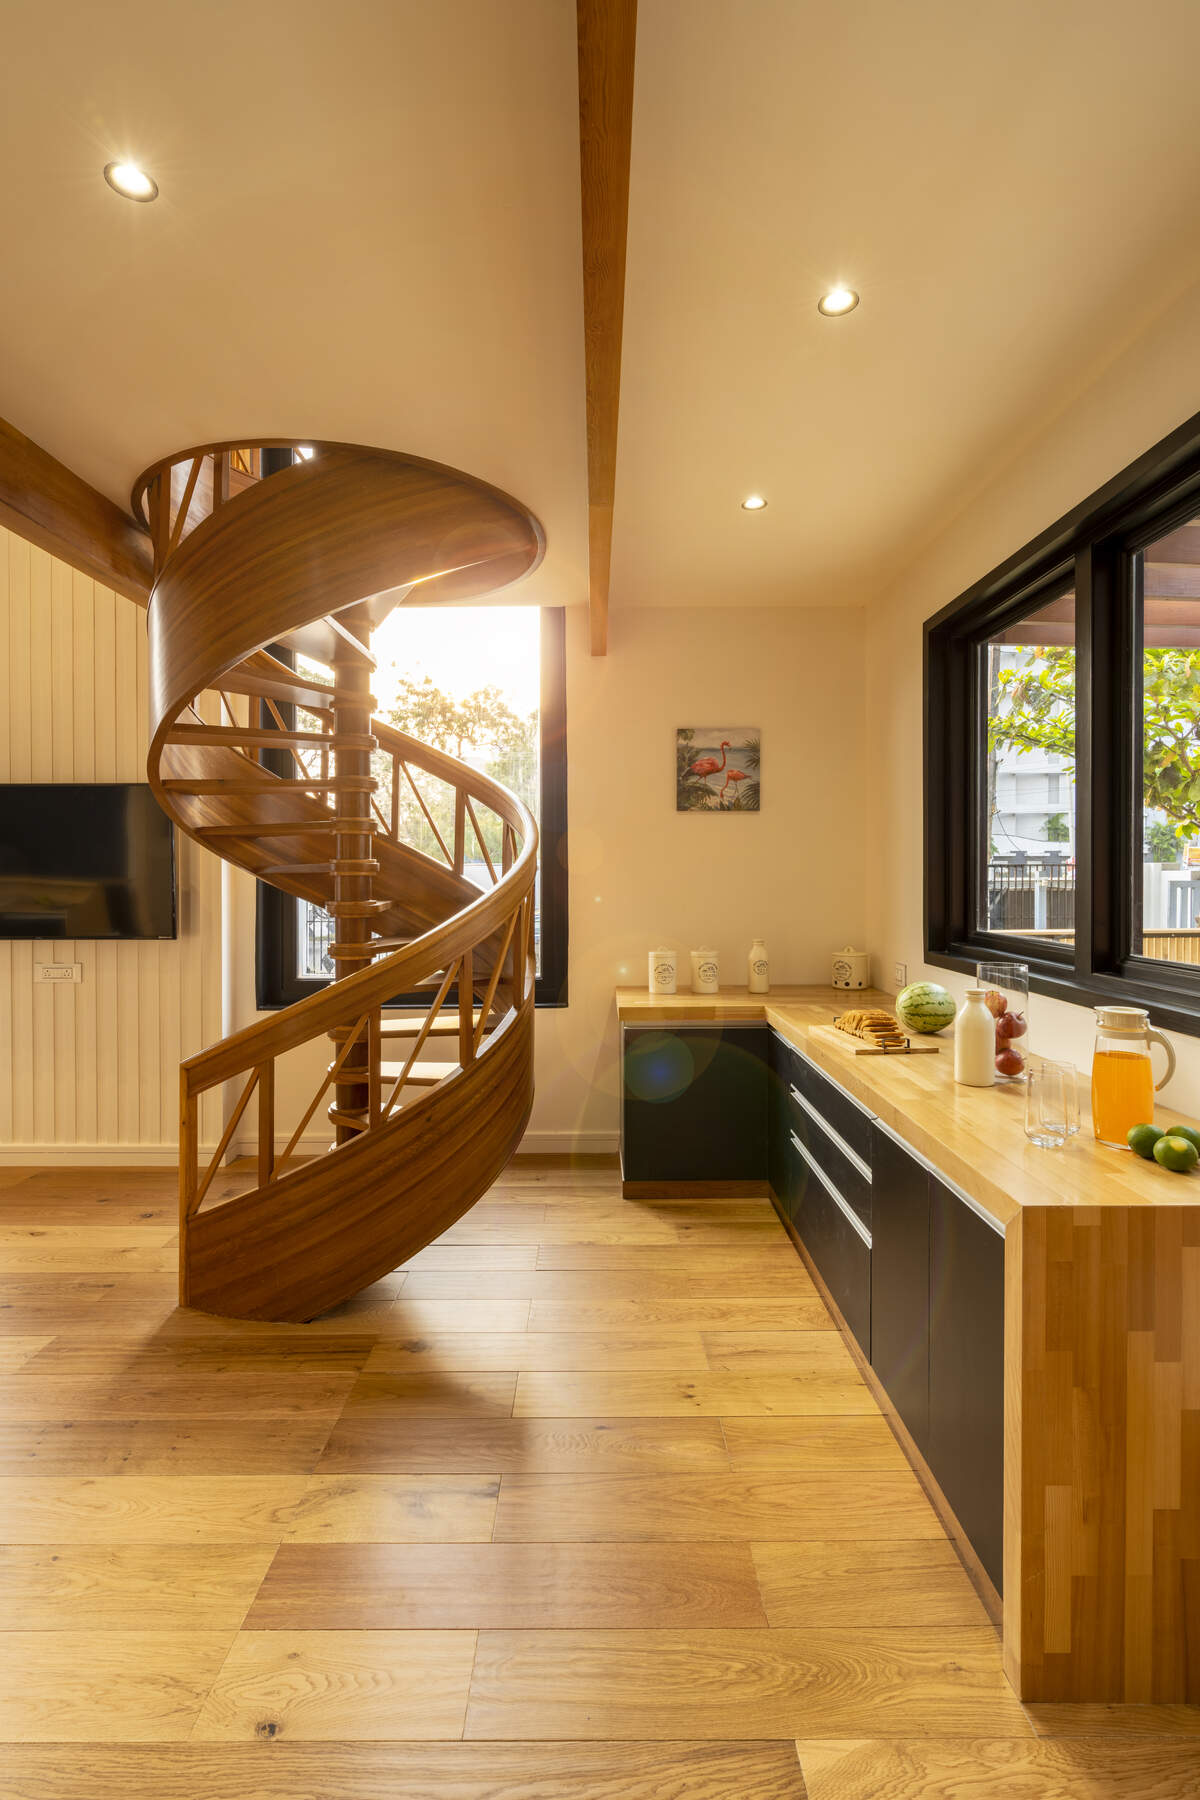 Sustainably sourced wood in kitchen